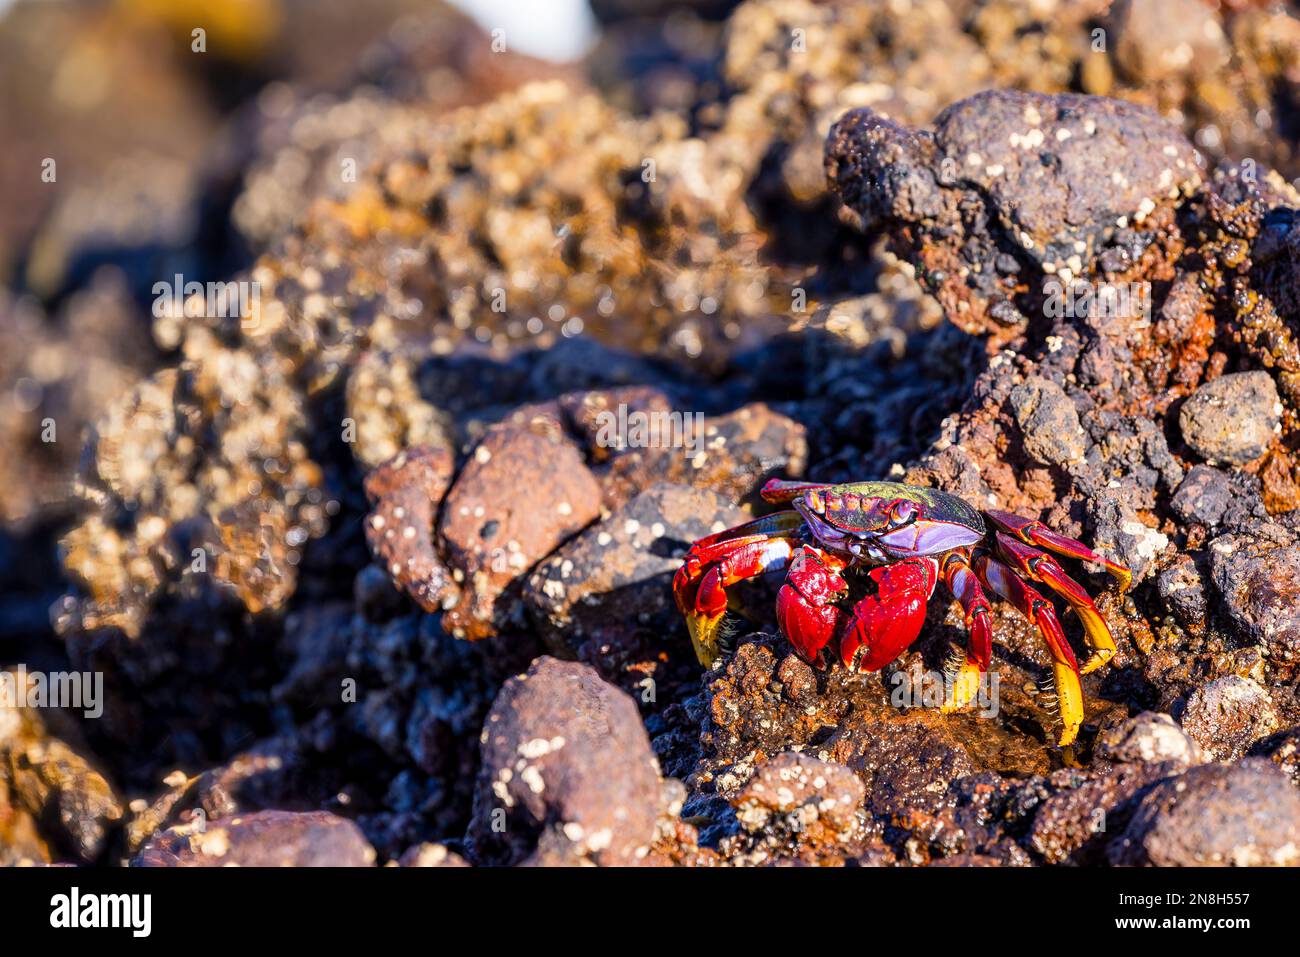 A little crab caught in the daylight on the shore. Closeup photo. Stock Photo